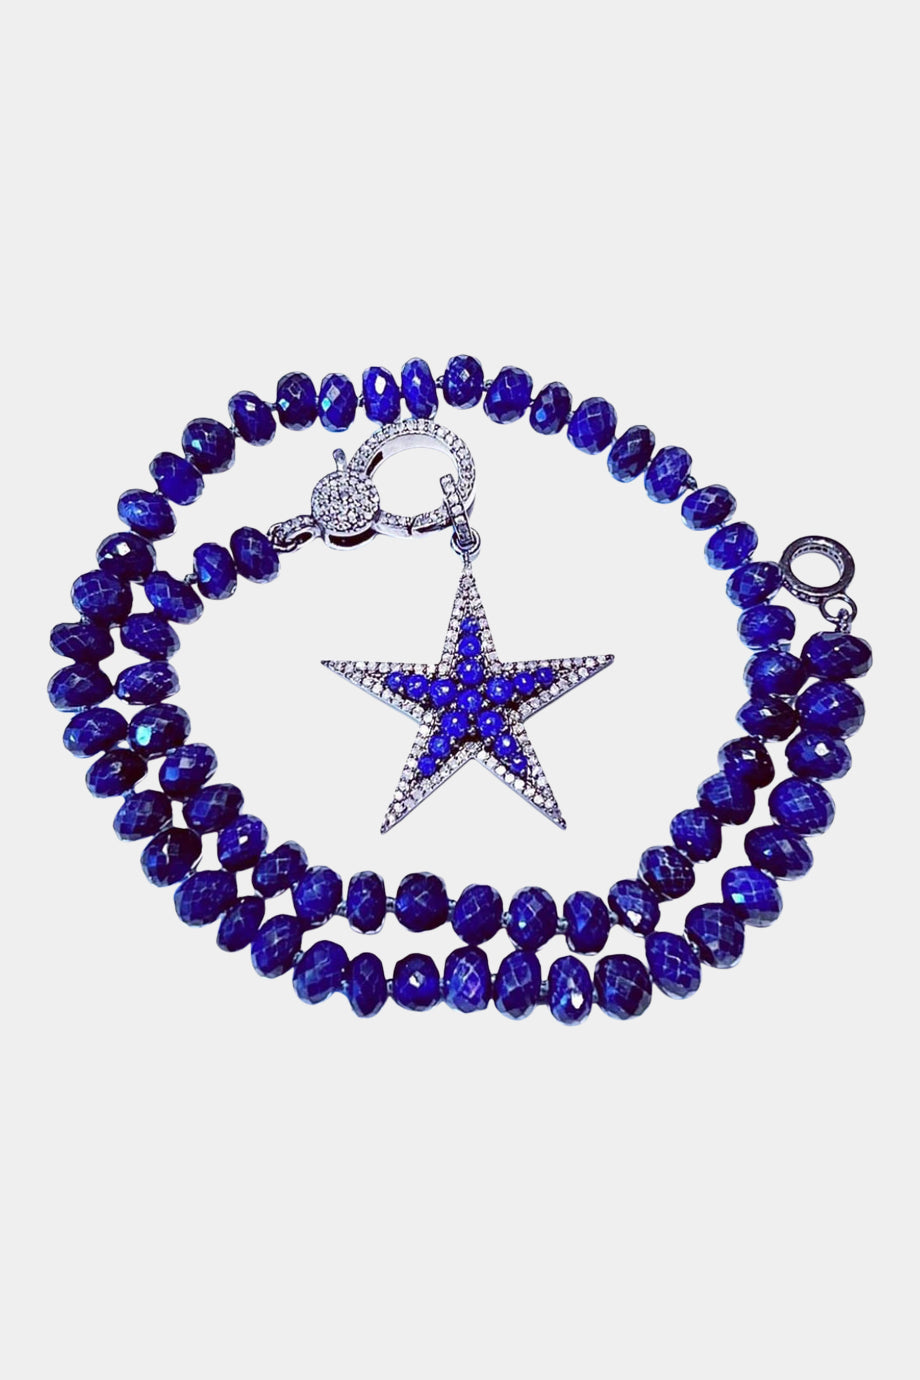 Blue Sapphire Knotted Necklace with Lapis Star